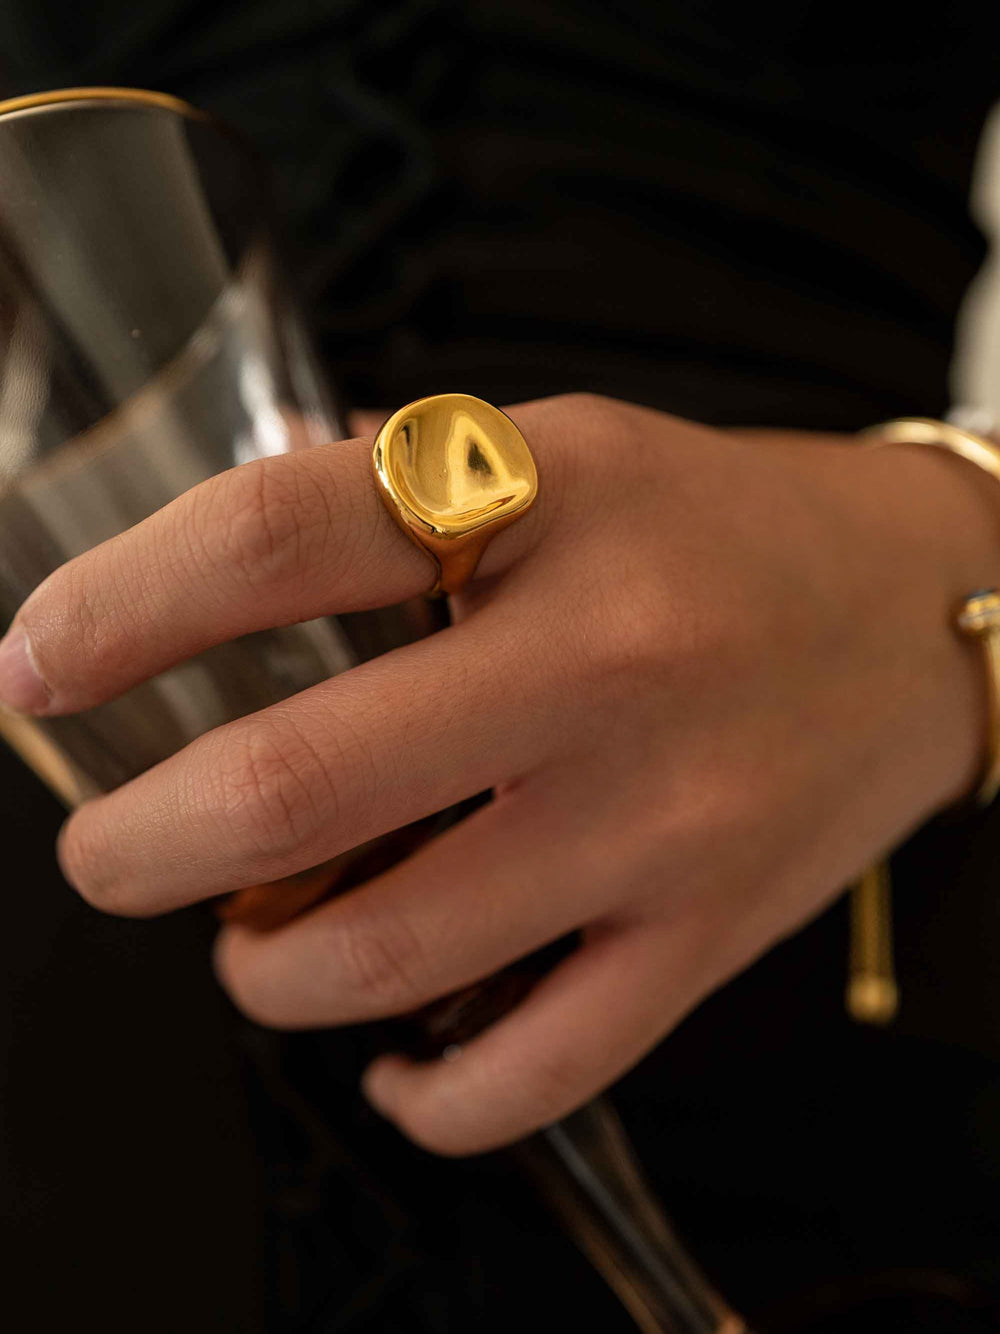 A HAND WEAR A Gold ring recessed design